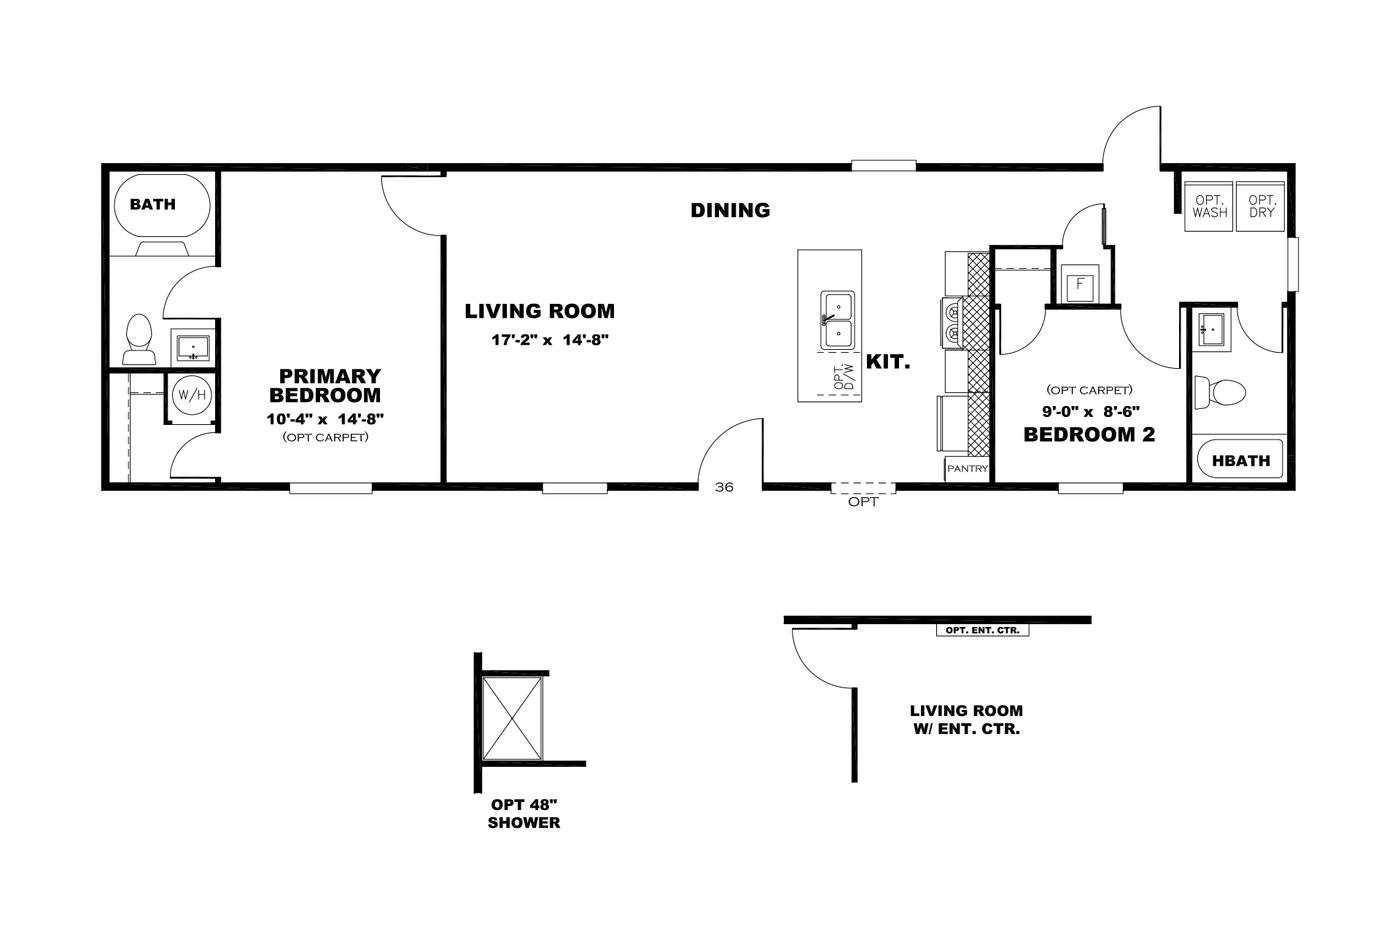 The MAYNARDVILLE CLASSIC 56 Floor Plan. This Manufactured Mobile Home features 2 bedrooms and 2 baths.